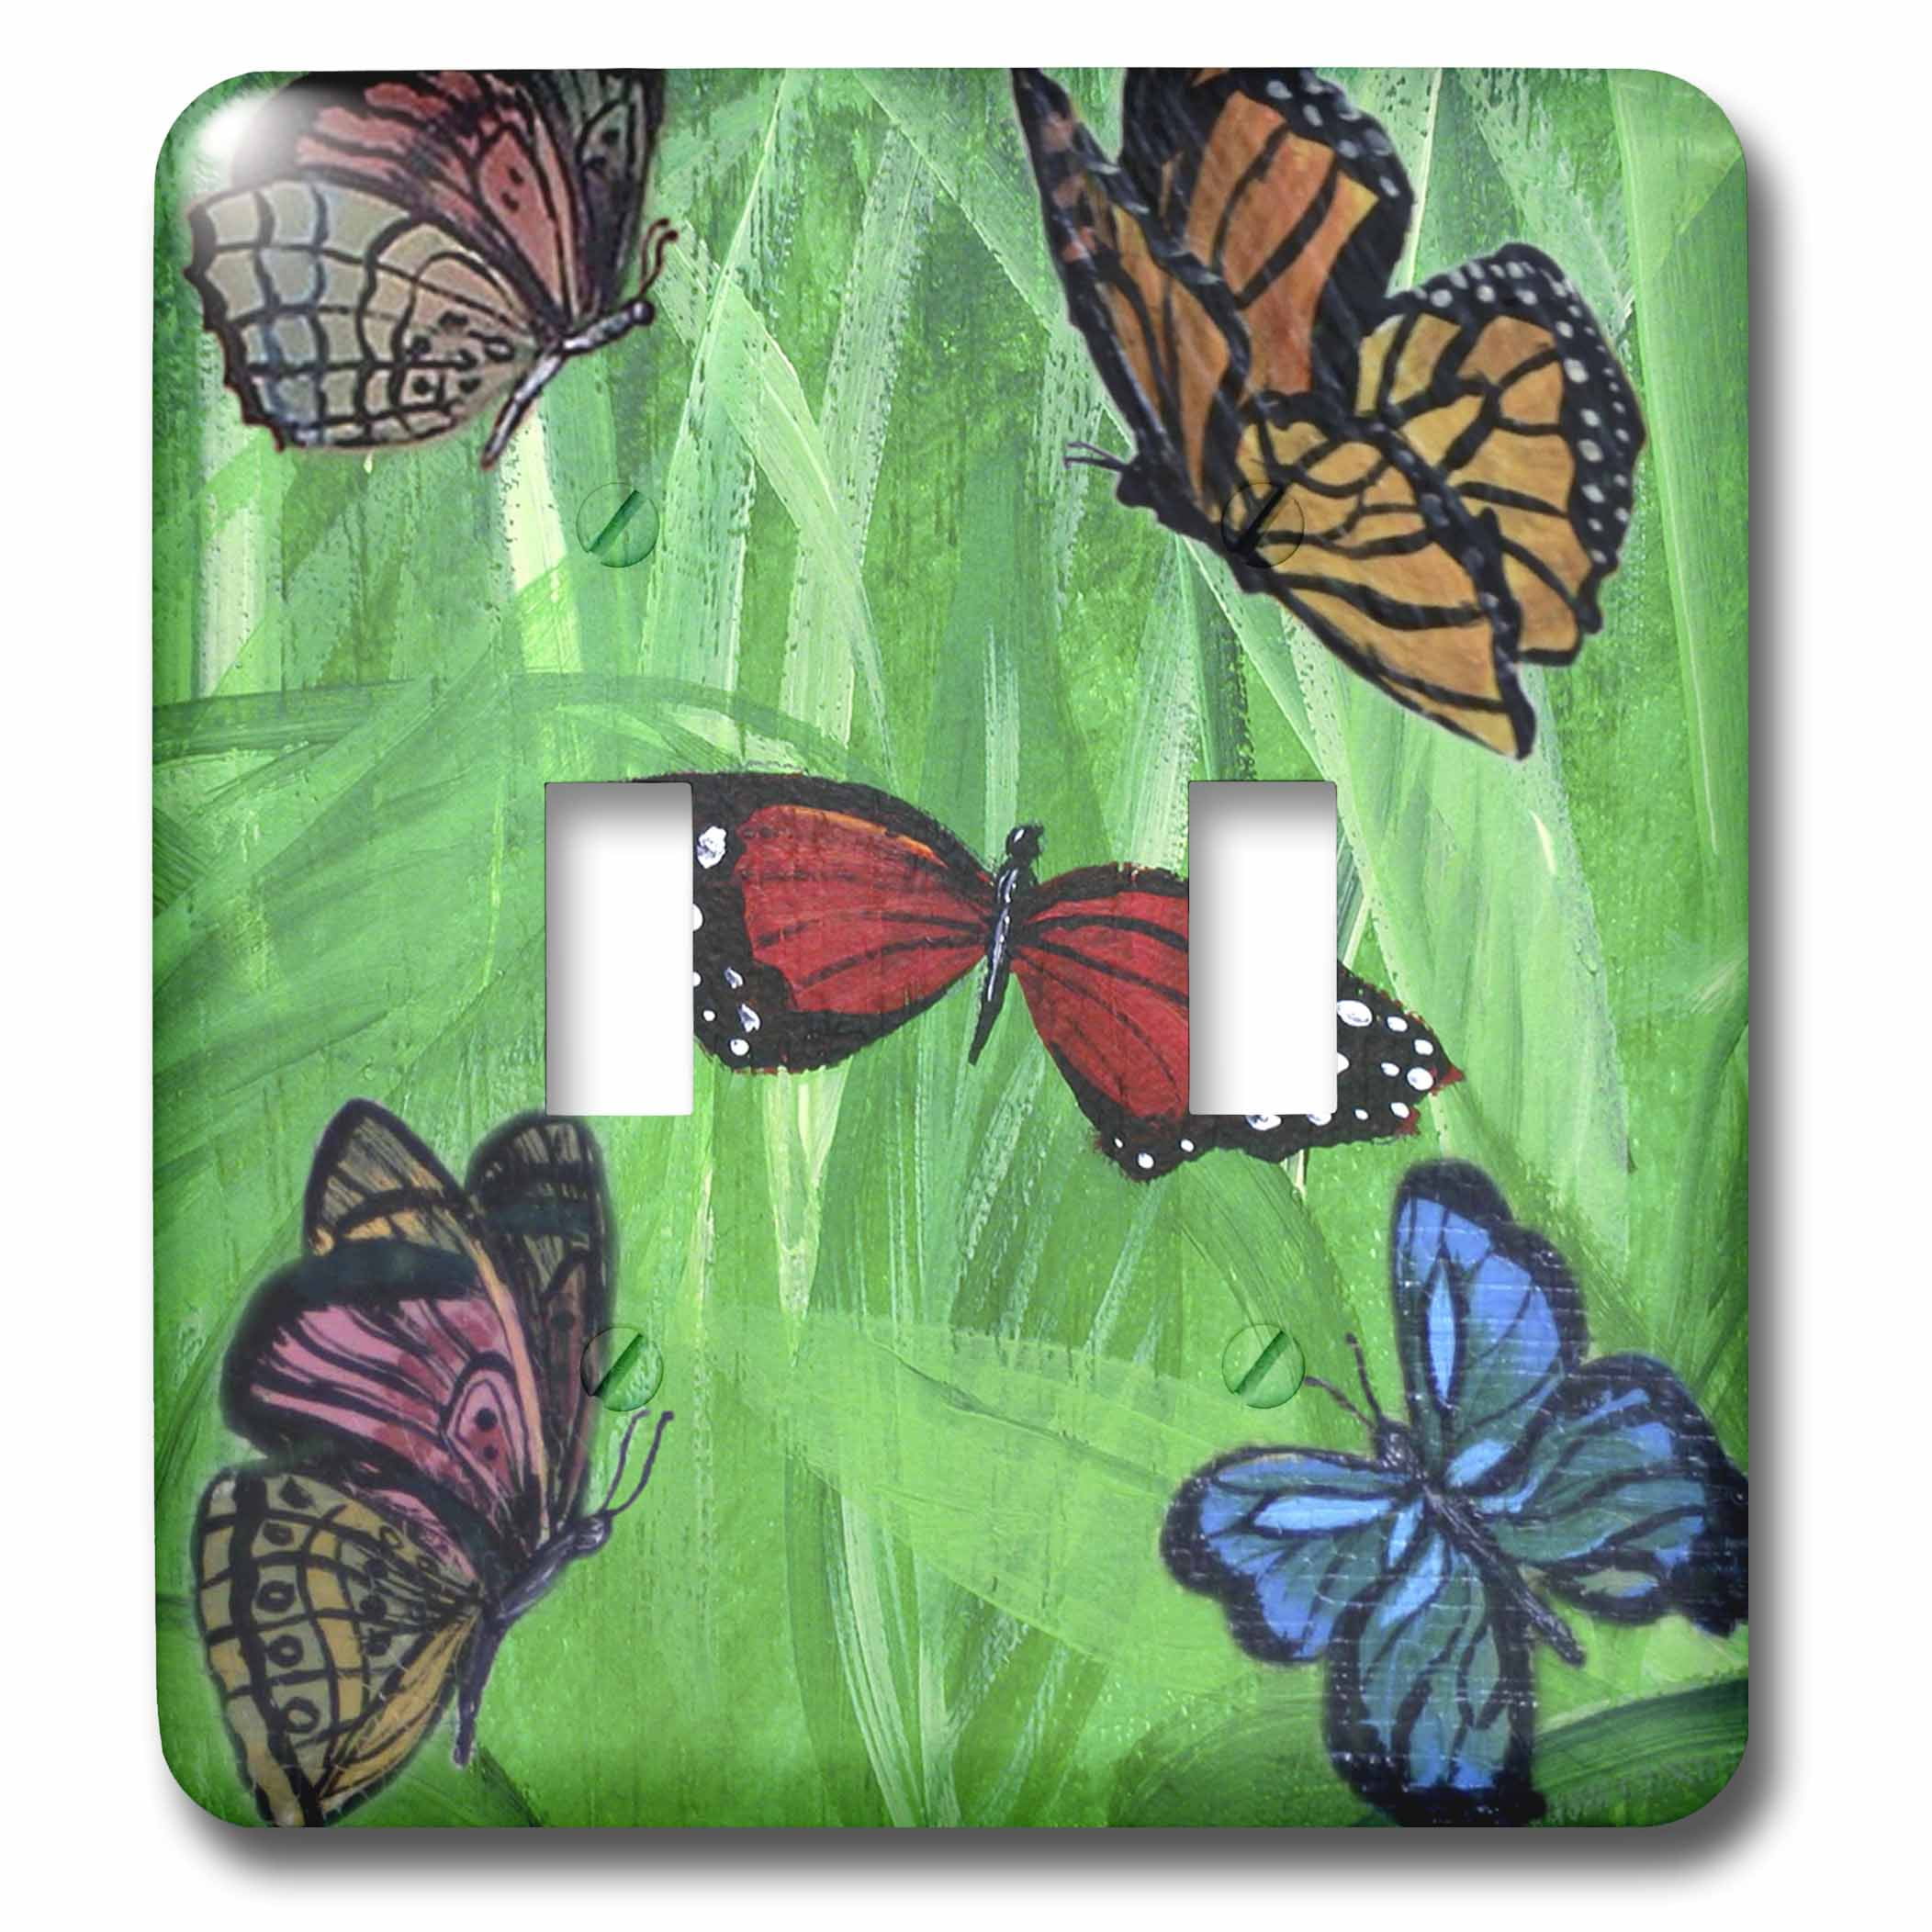 3dRose lsp_44350_2 Multiple Colorful Butterflies with Green Grassy Background Toggle switch